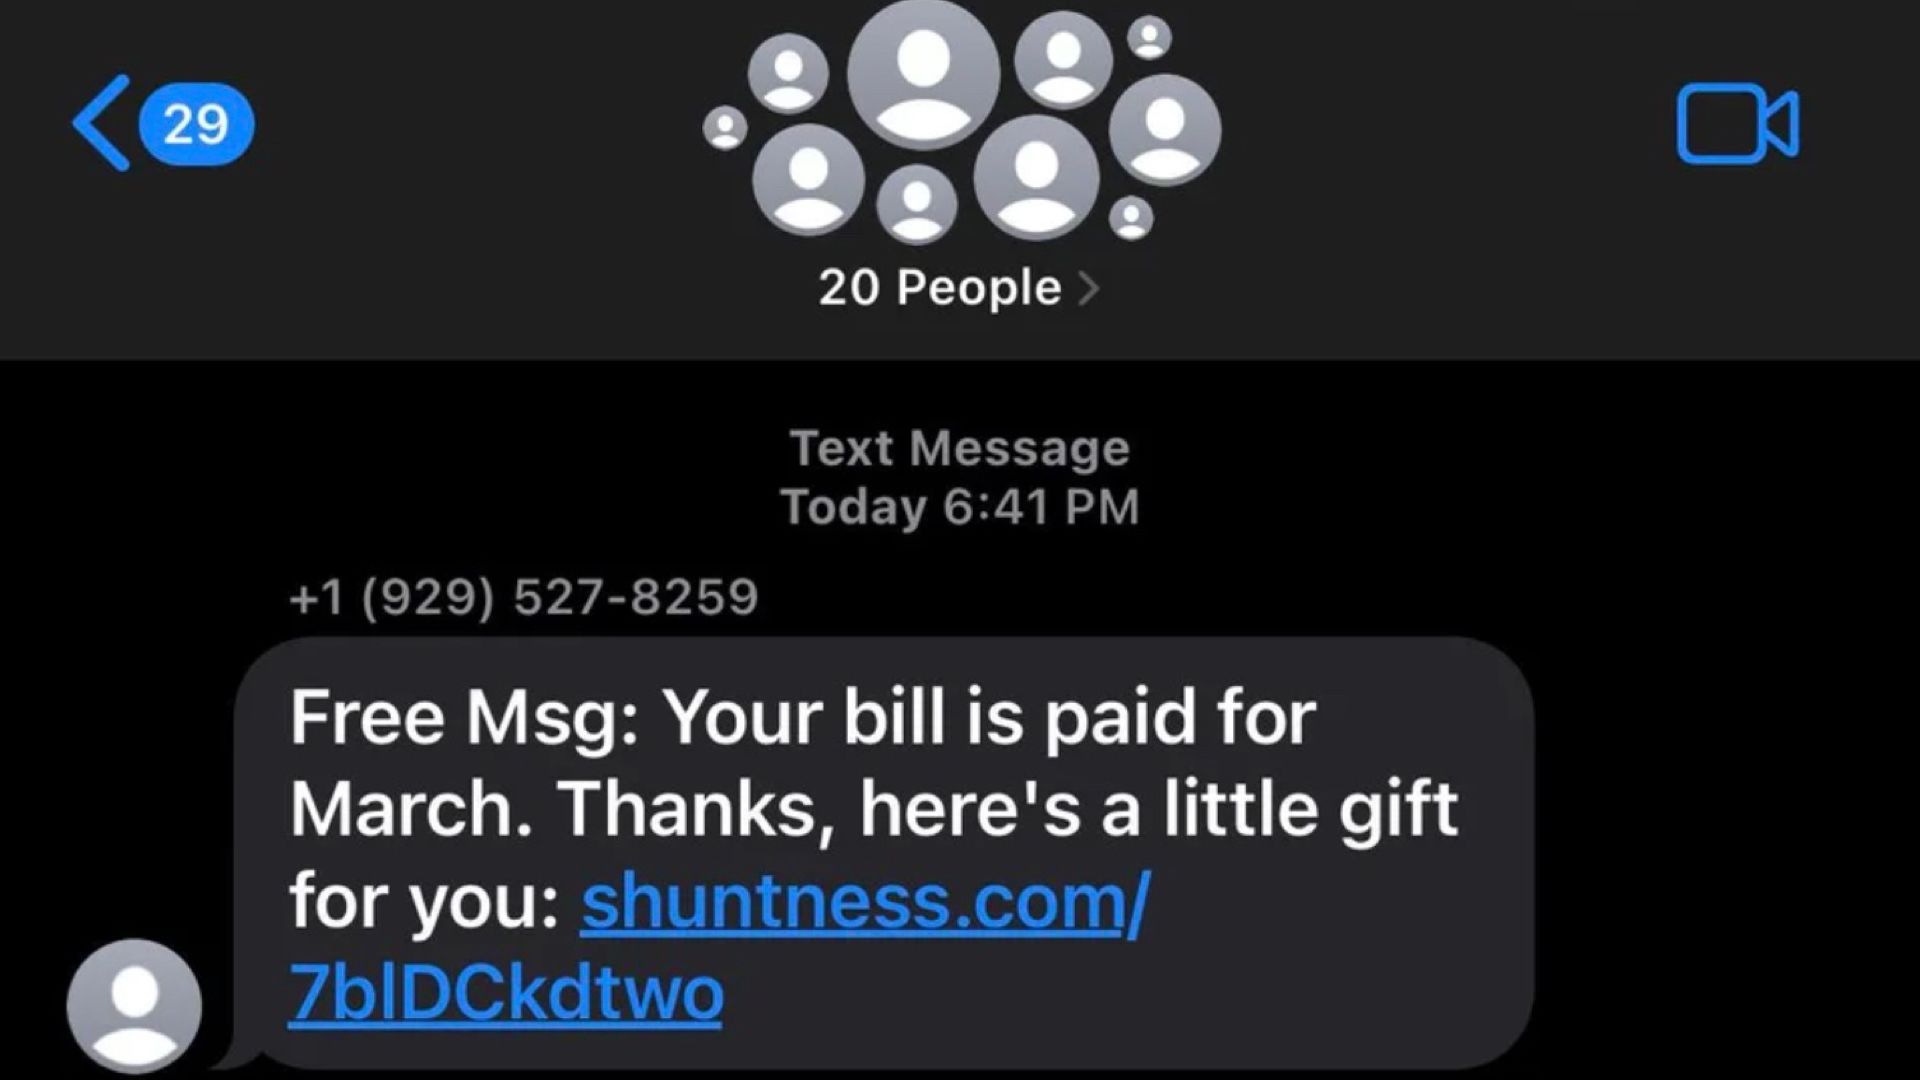 spam text messages showing up in group messages